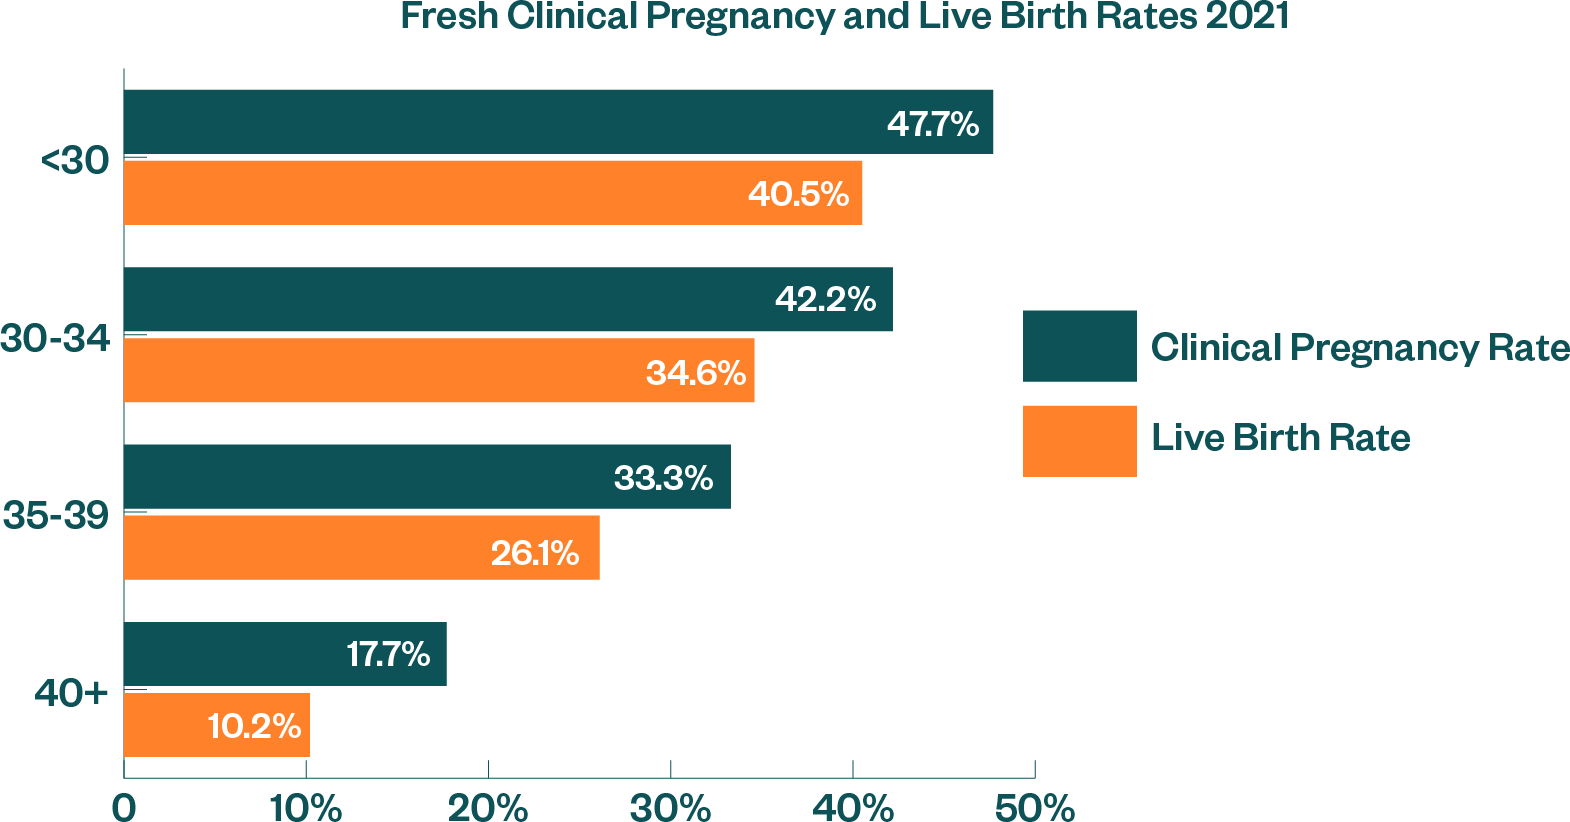 MI2417 Success Rates2021 V1 Clinical Pregnancy And Live Birth Rates Fres 01